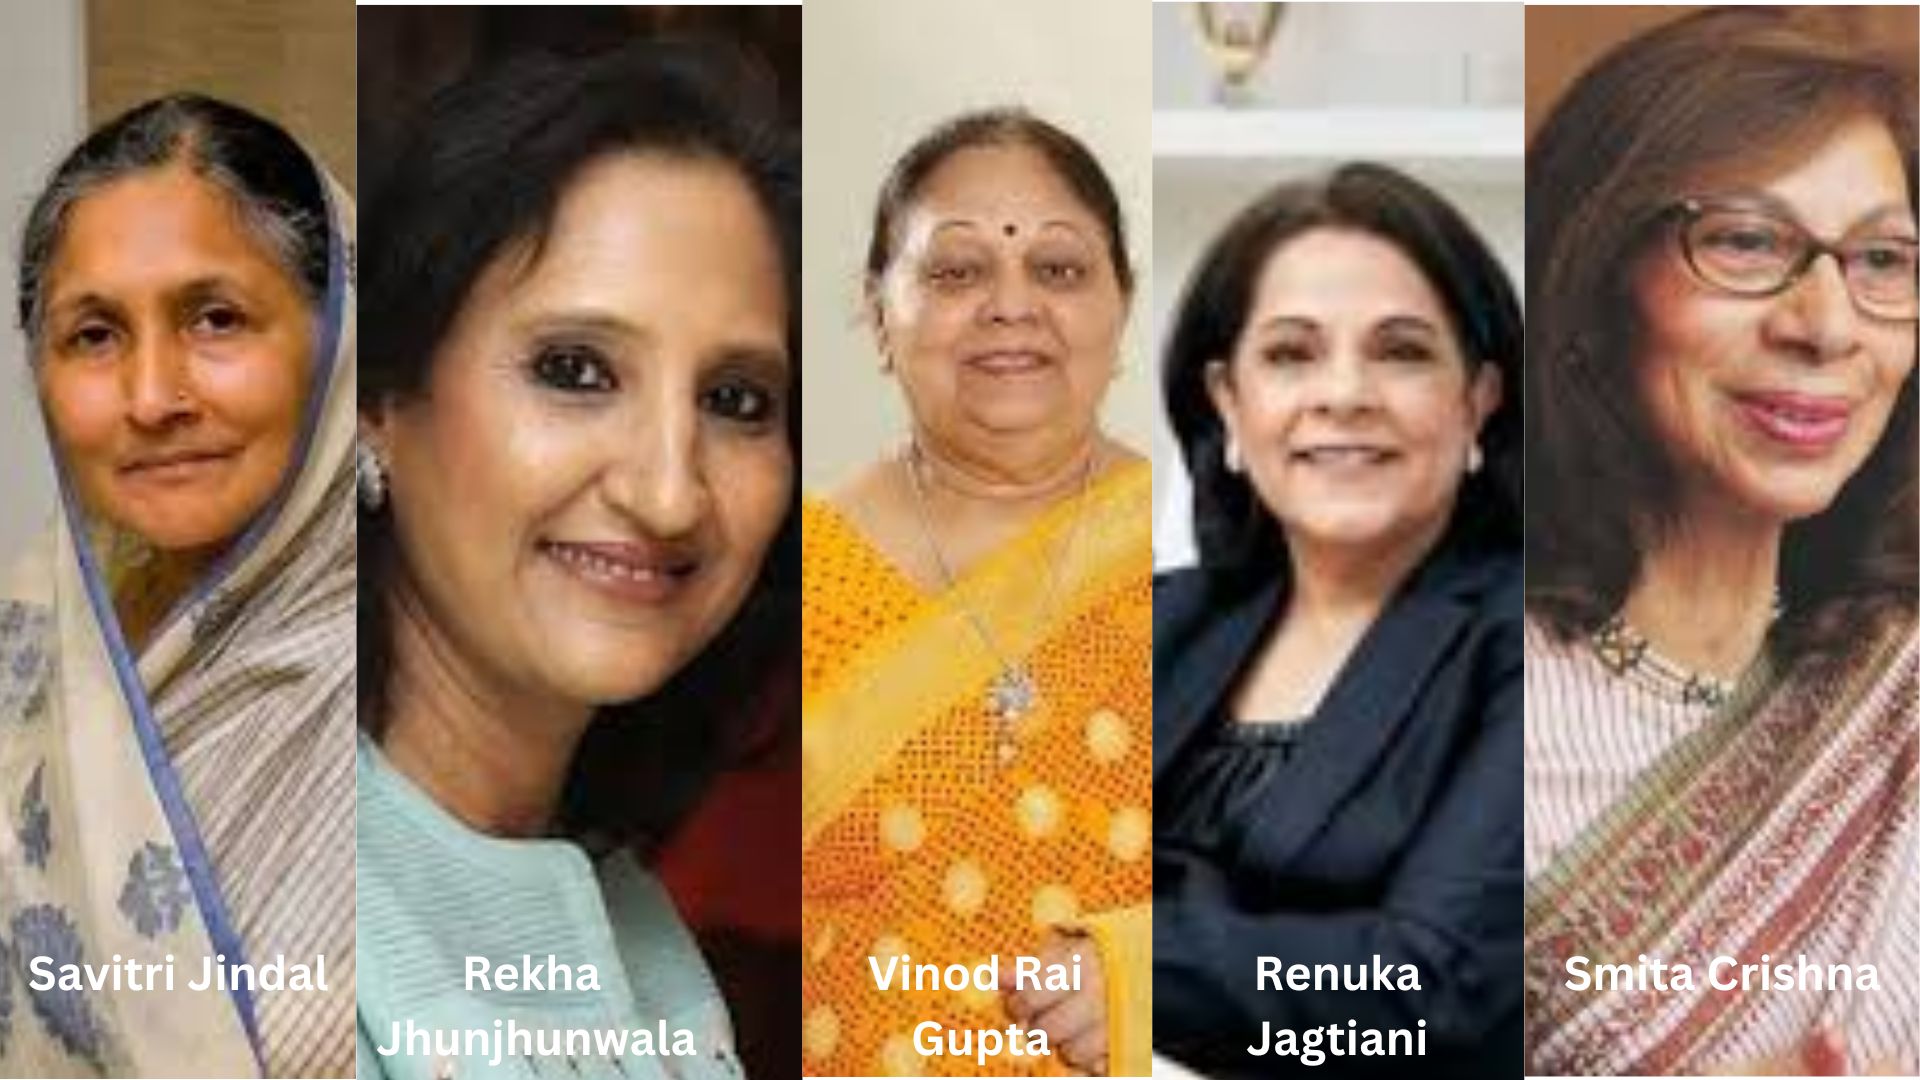 Forbes’ list includes India’s Top Women billionaires